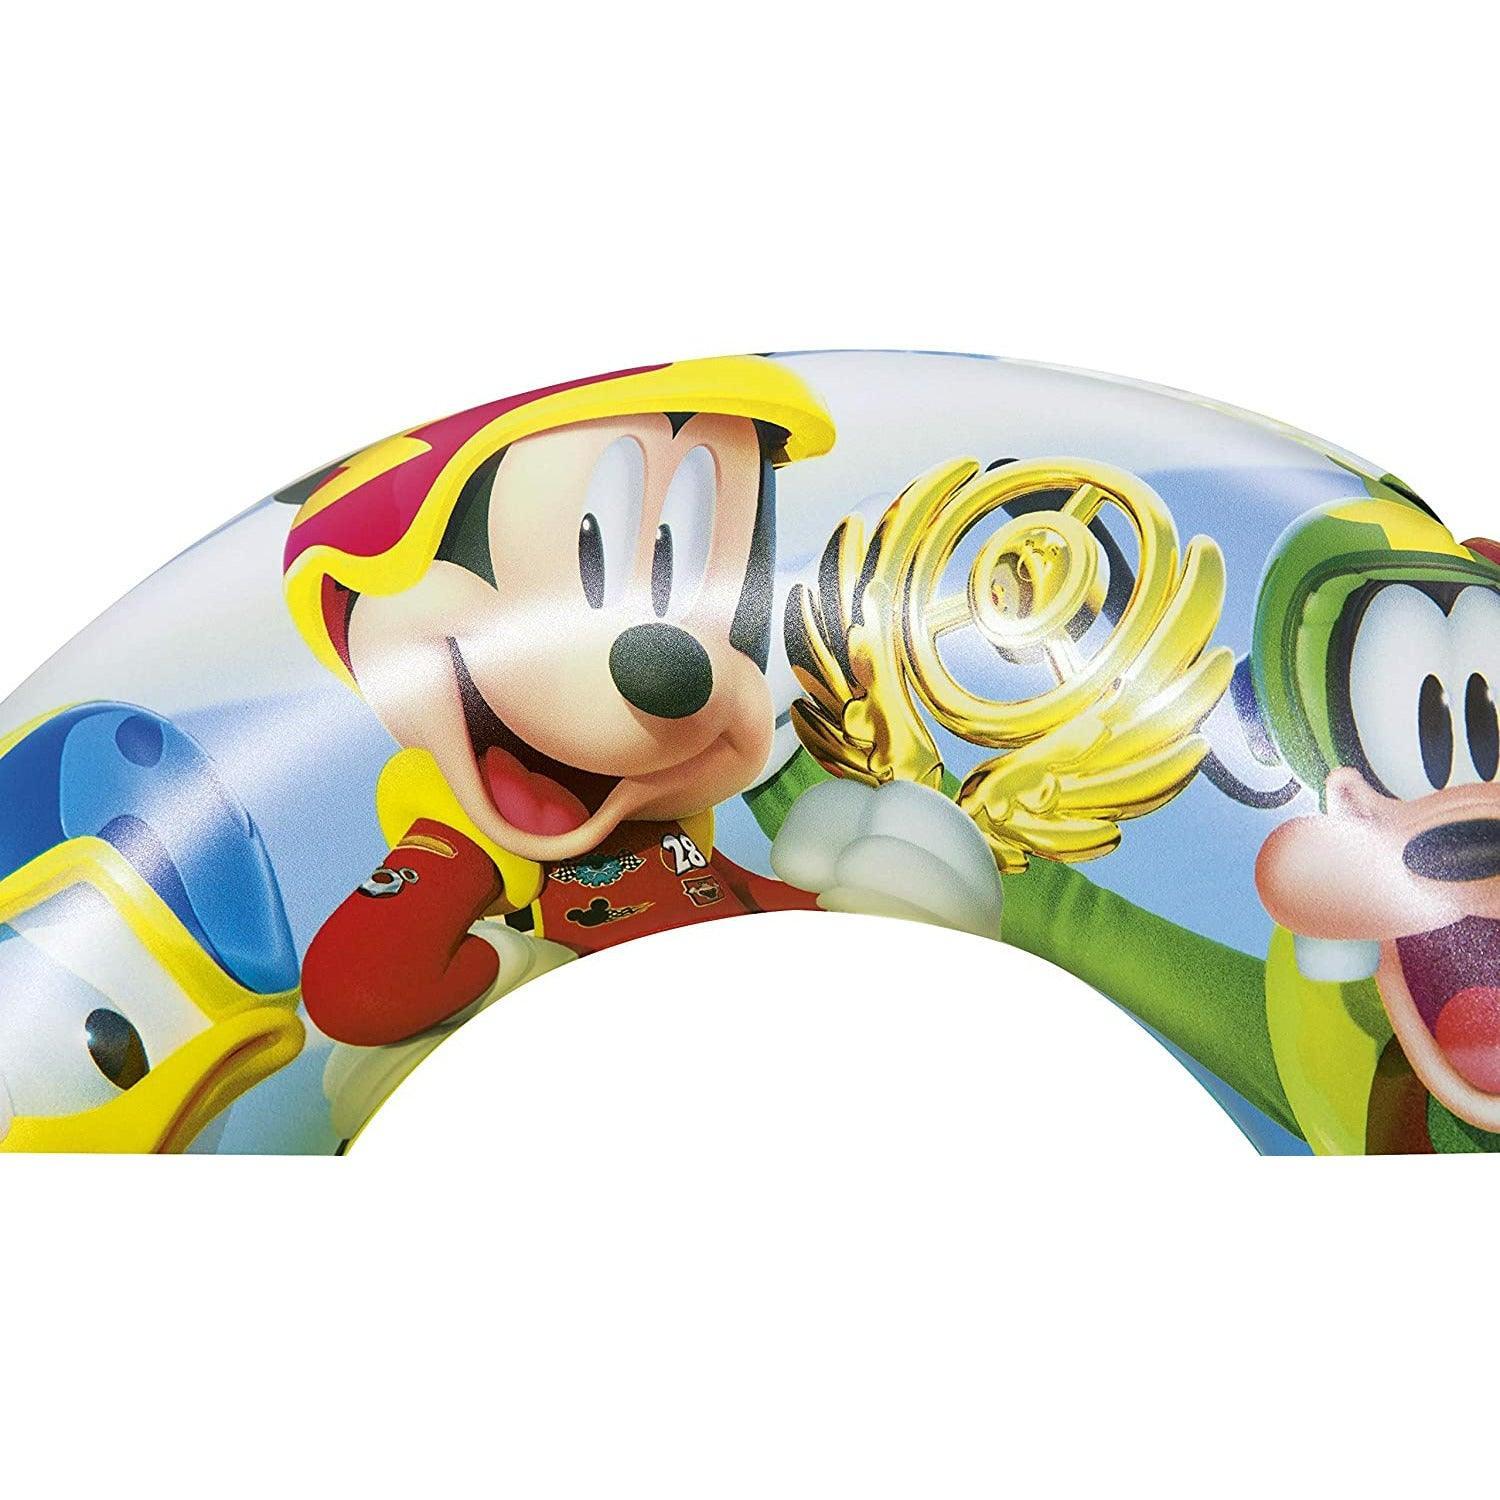 Bestway Mickey Mouse Clubhouse Inflatable Swim Ring - Ourkids - Bestway